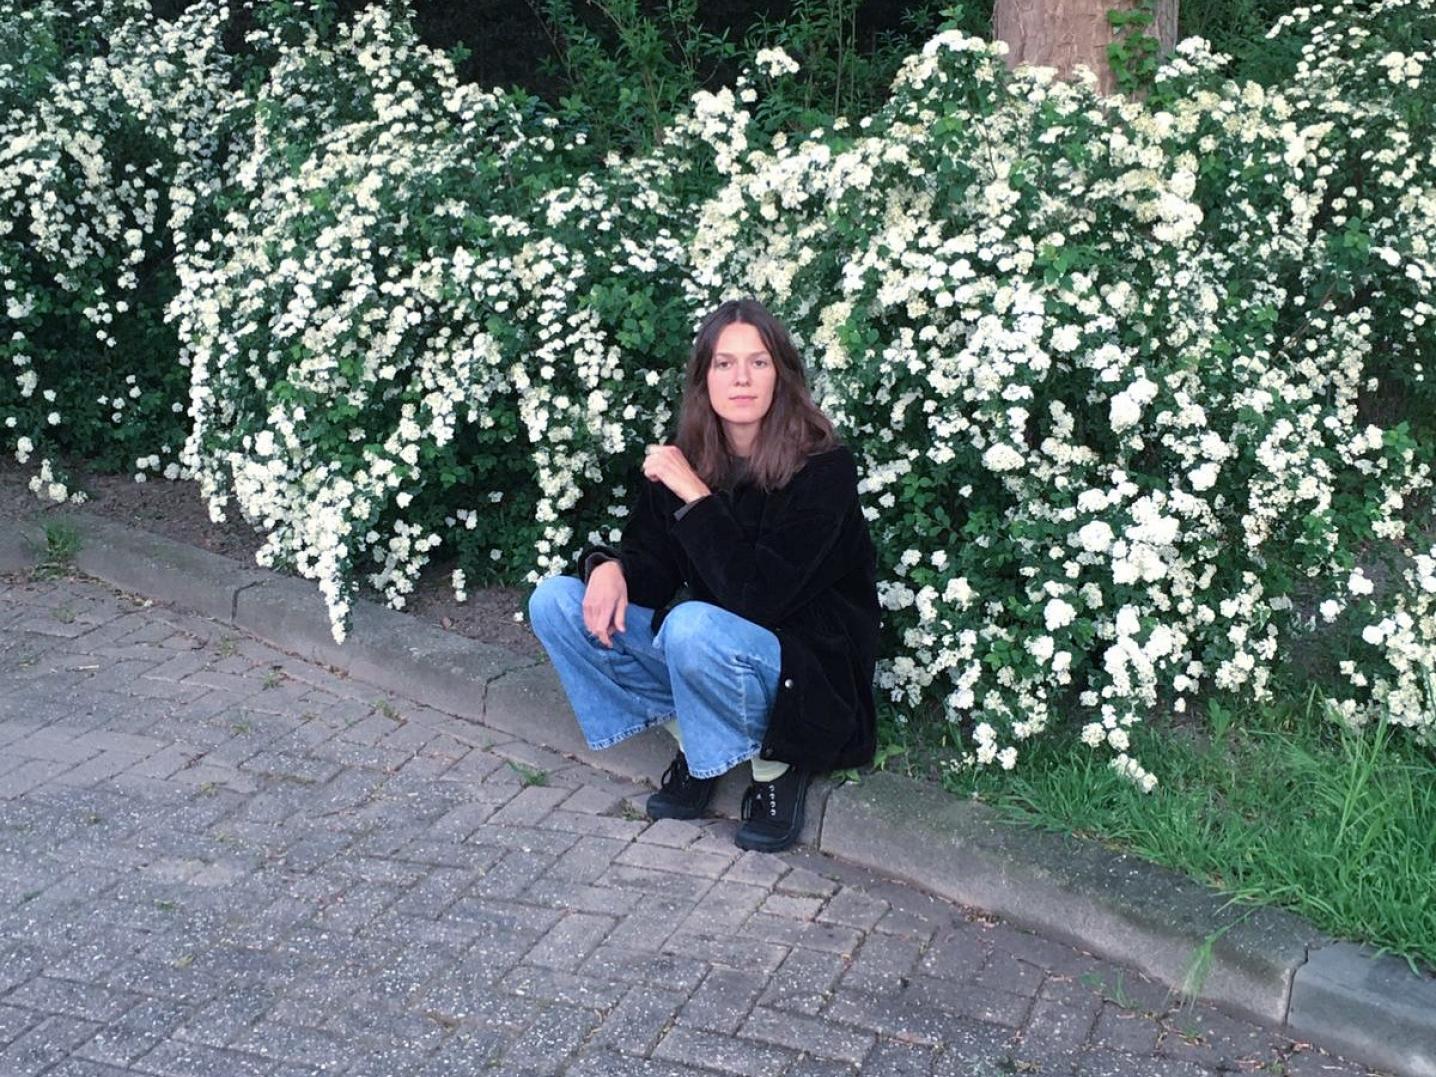 Artist Sanne Vaassen crouching in front of a bush with white flowers